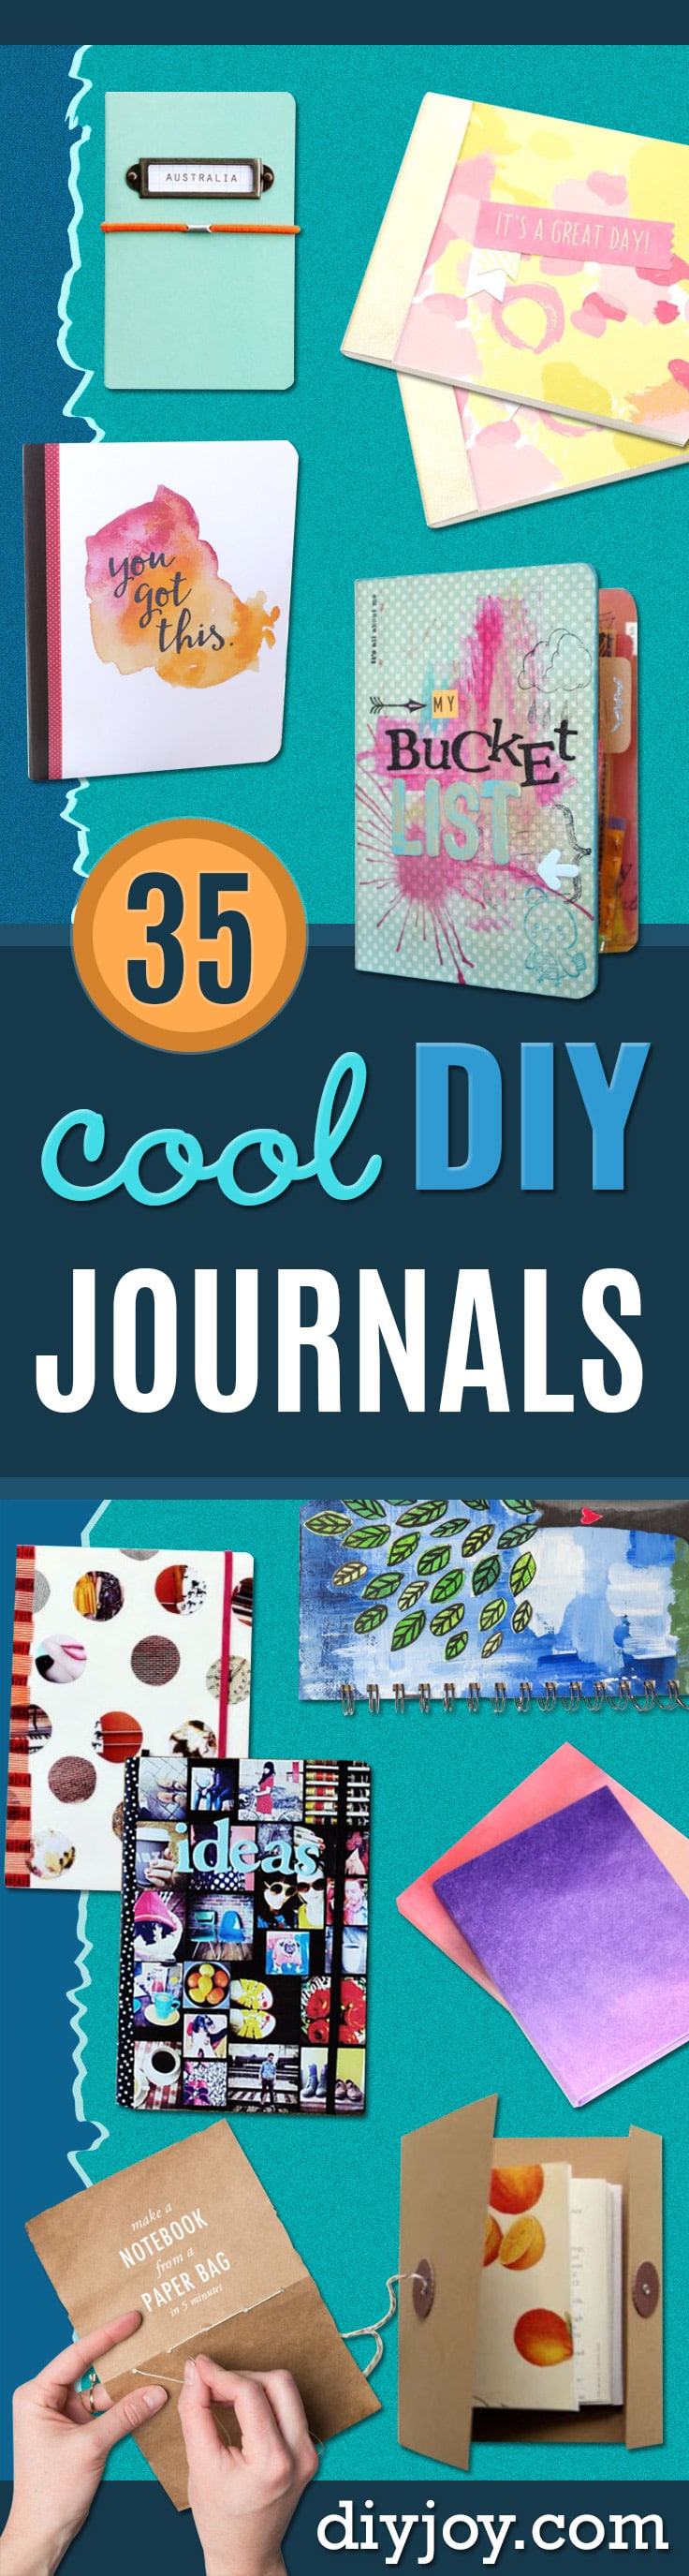 DIY Journals - Ideas For Making A Handmade Journal - Cover Art Tutorial, Binding Tips, Easy Craft Ideas for Kids and For Teens - Step By Step Instructions for Making From Scratch, From An Old Book - Leather, Faux Marble, Paper, Monogram, Cute Do It Yourself Gift Idea